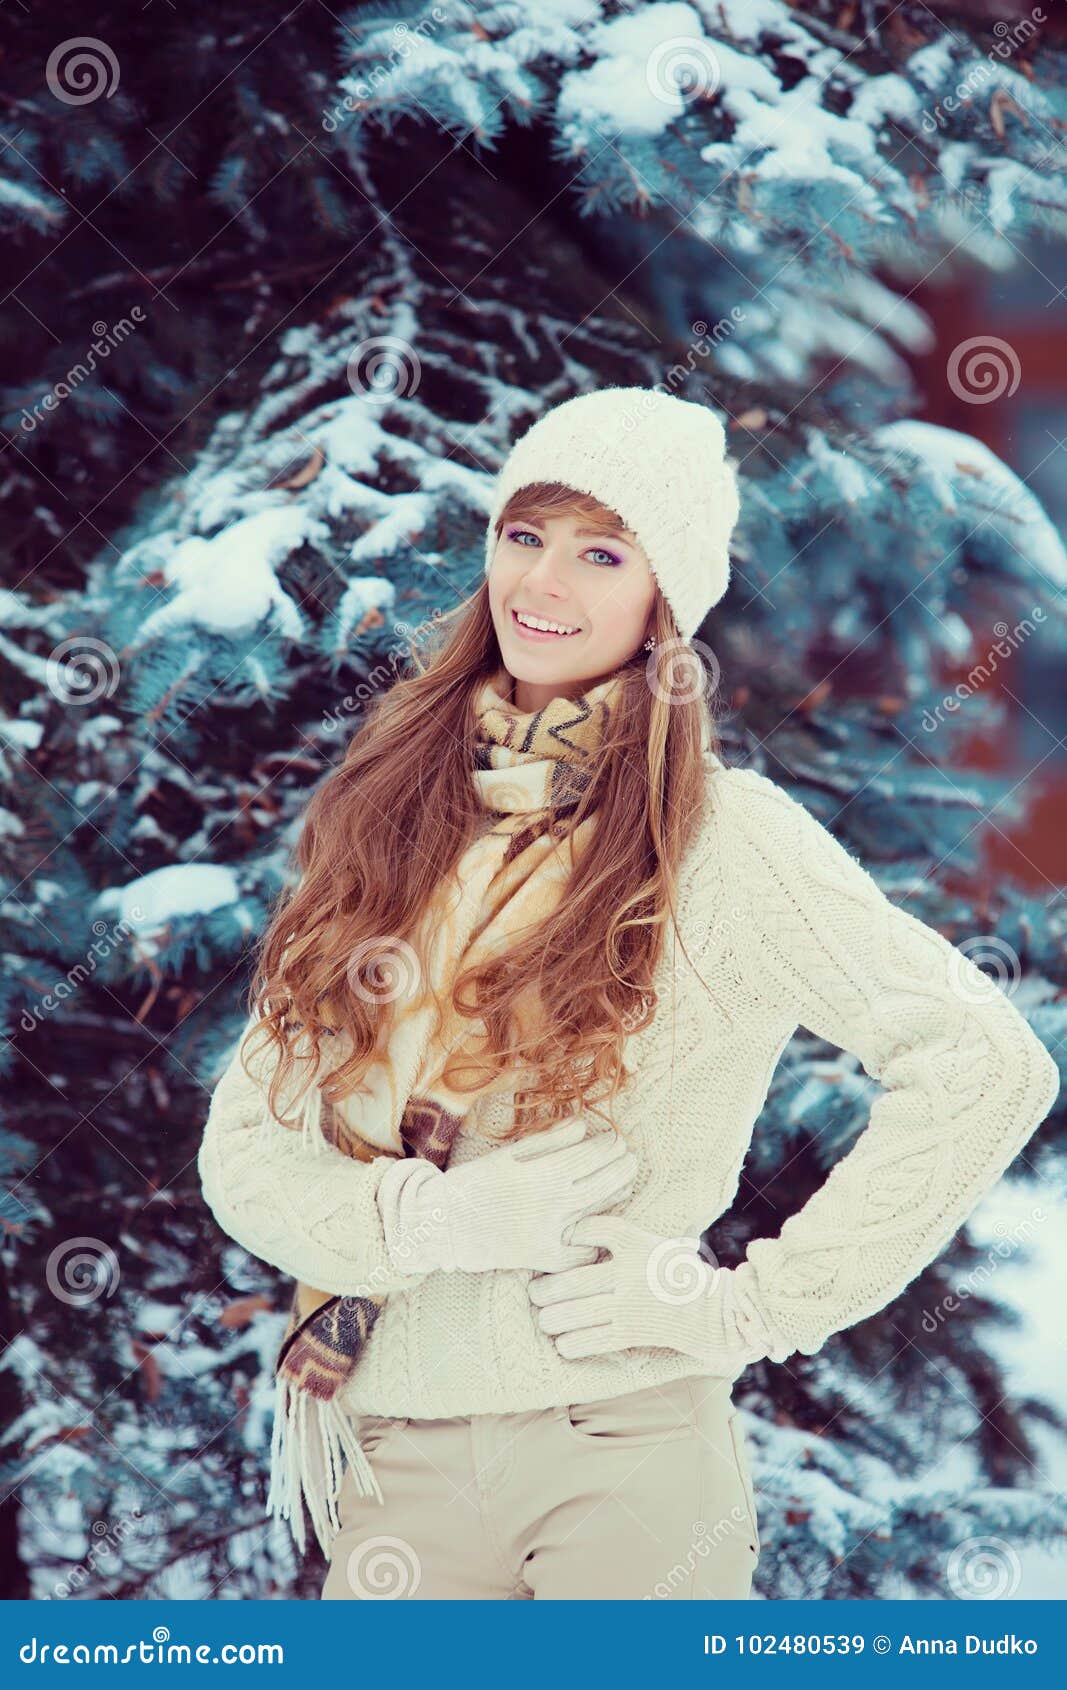 Attractive Young Woman in Wintertime Outdoor Stock Image - Image of ...